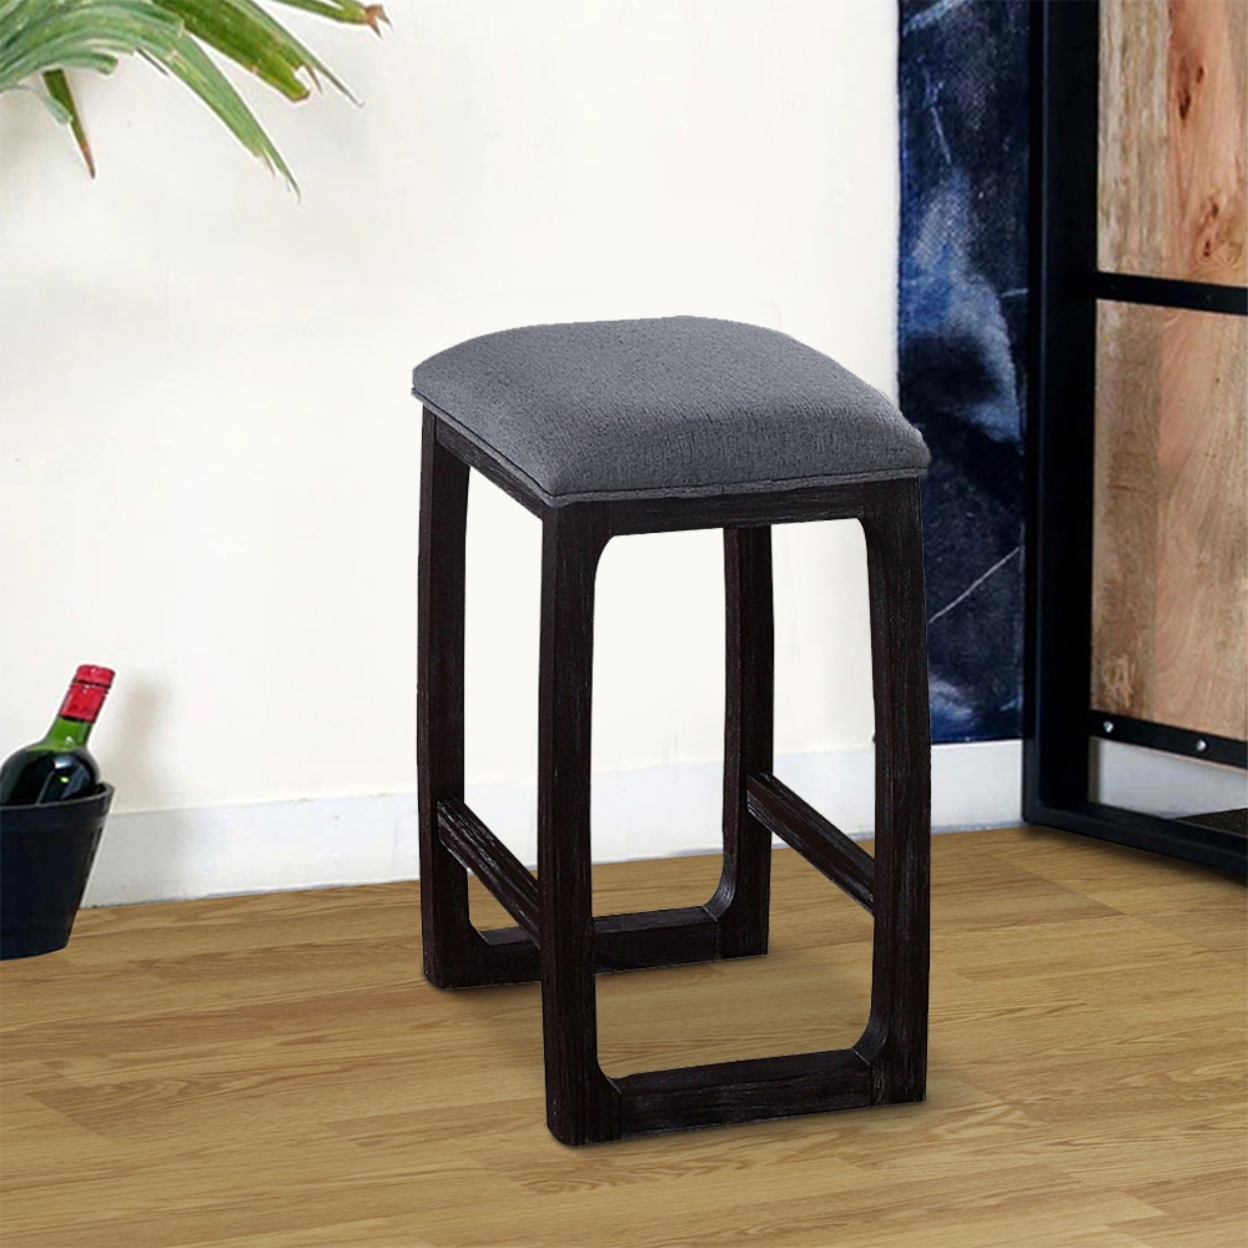 Wooden Counter Height Stool With Fabric Upholstered Seat, Gray And Brown- Saltoro Sherpi